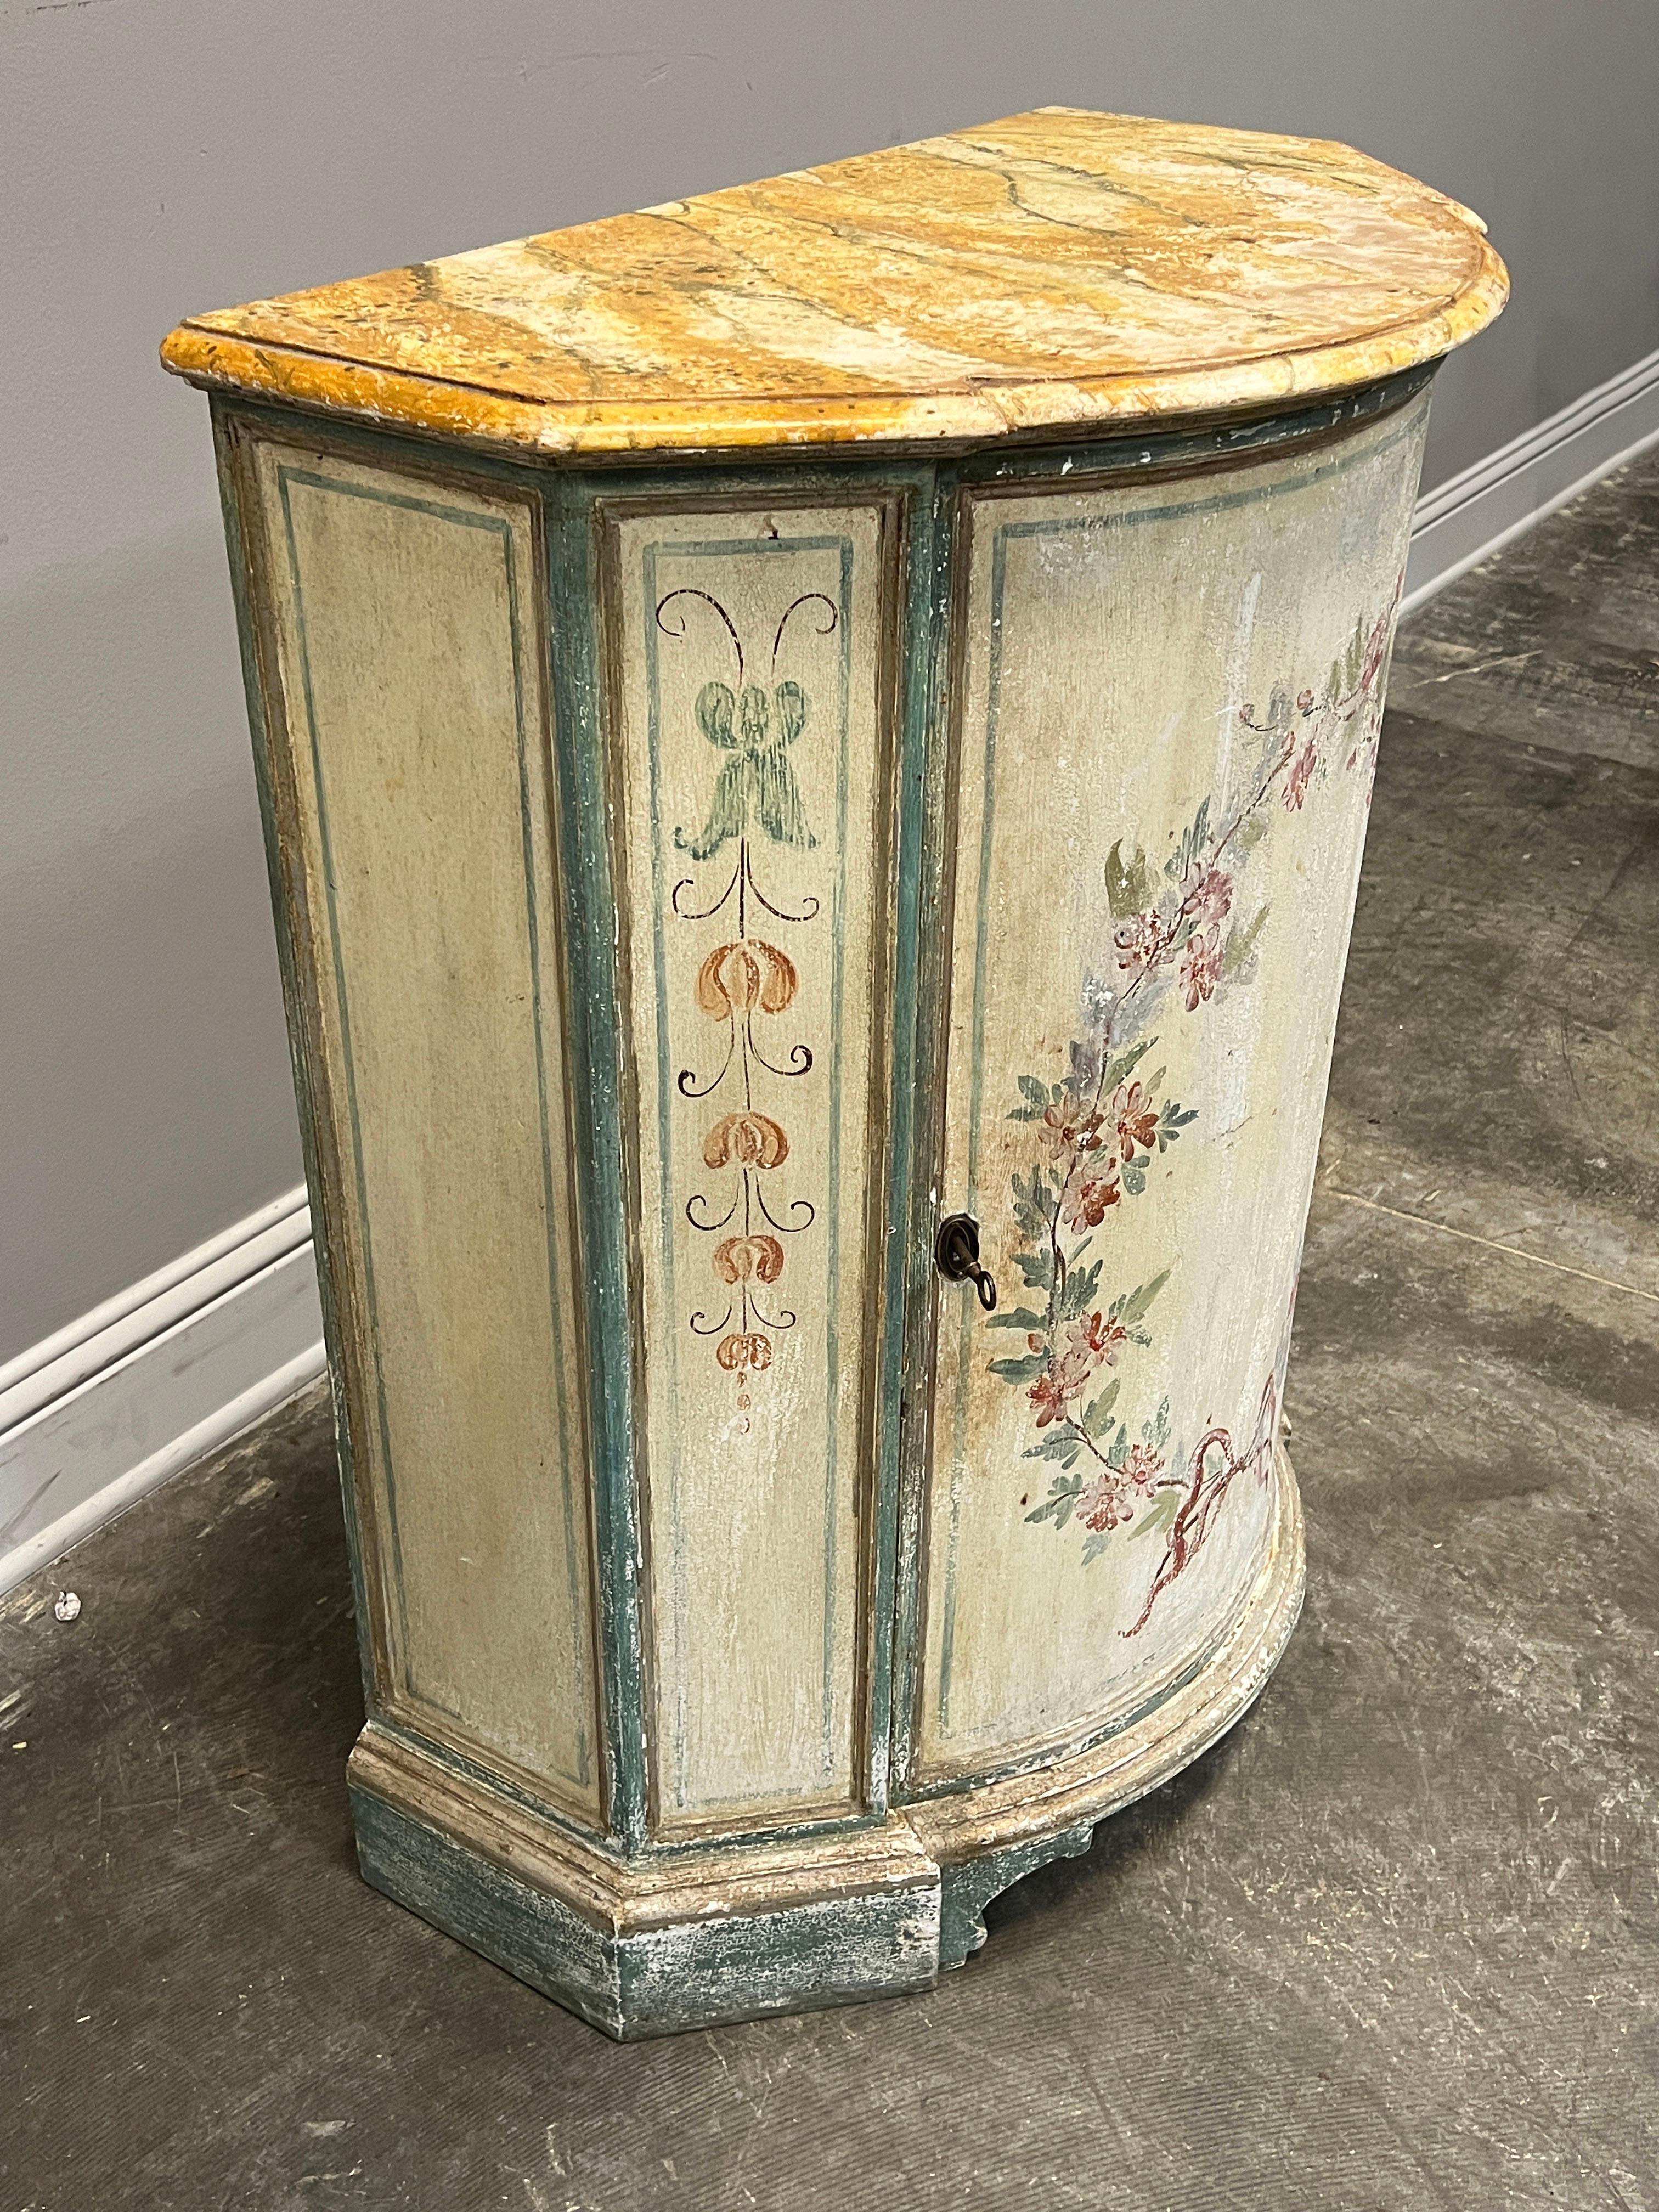 20th C. French single door hand painted cupboard with painted faux bois top. Paint design indicative of the Louis XVI style. Great cabinet for a potential sink in a powder bath with a single shelf and working key.